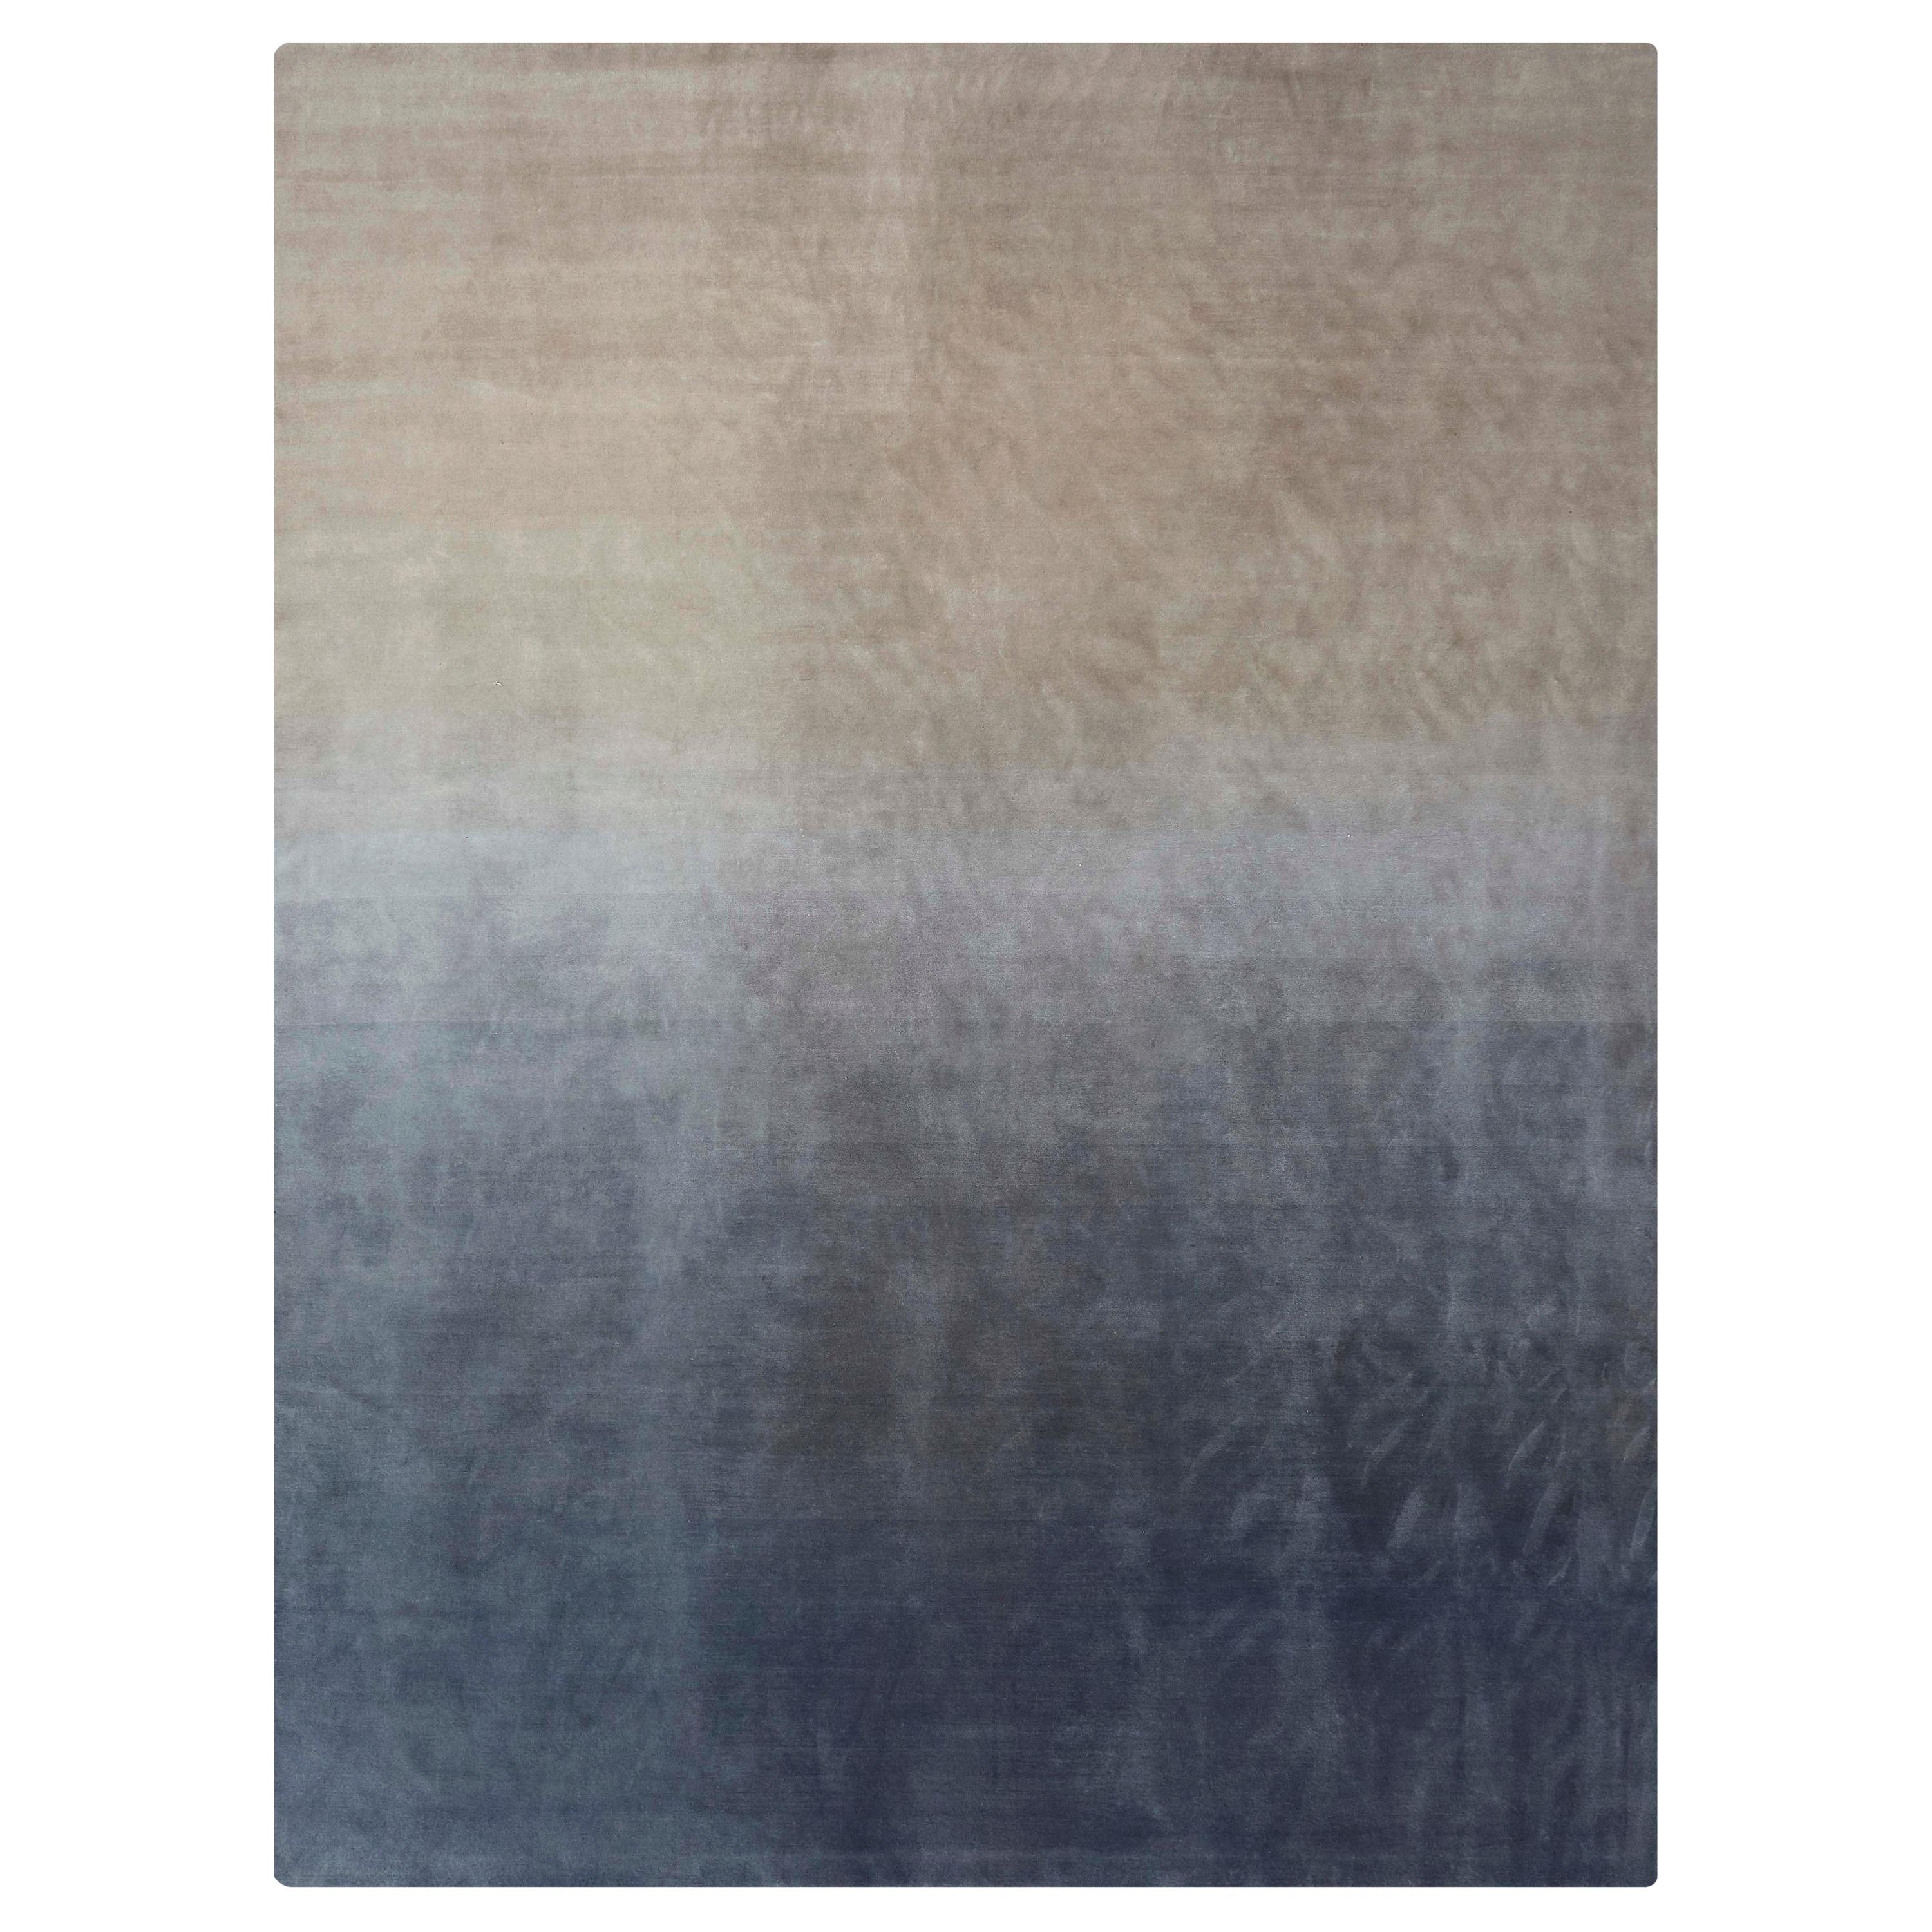 For Sale: Gray (Beige Gray) GAN Hand Knotted Degrade Medium Rug by Patricia Urquiola